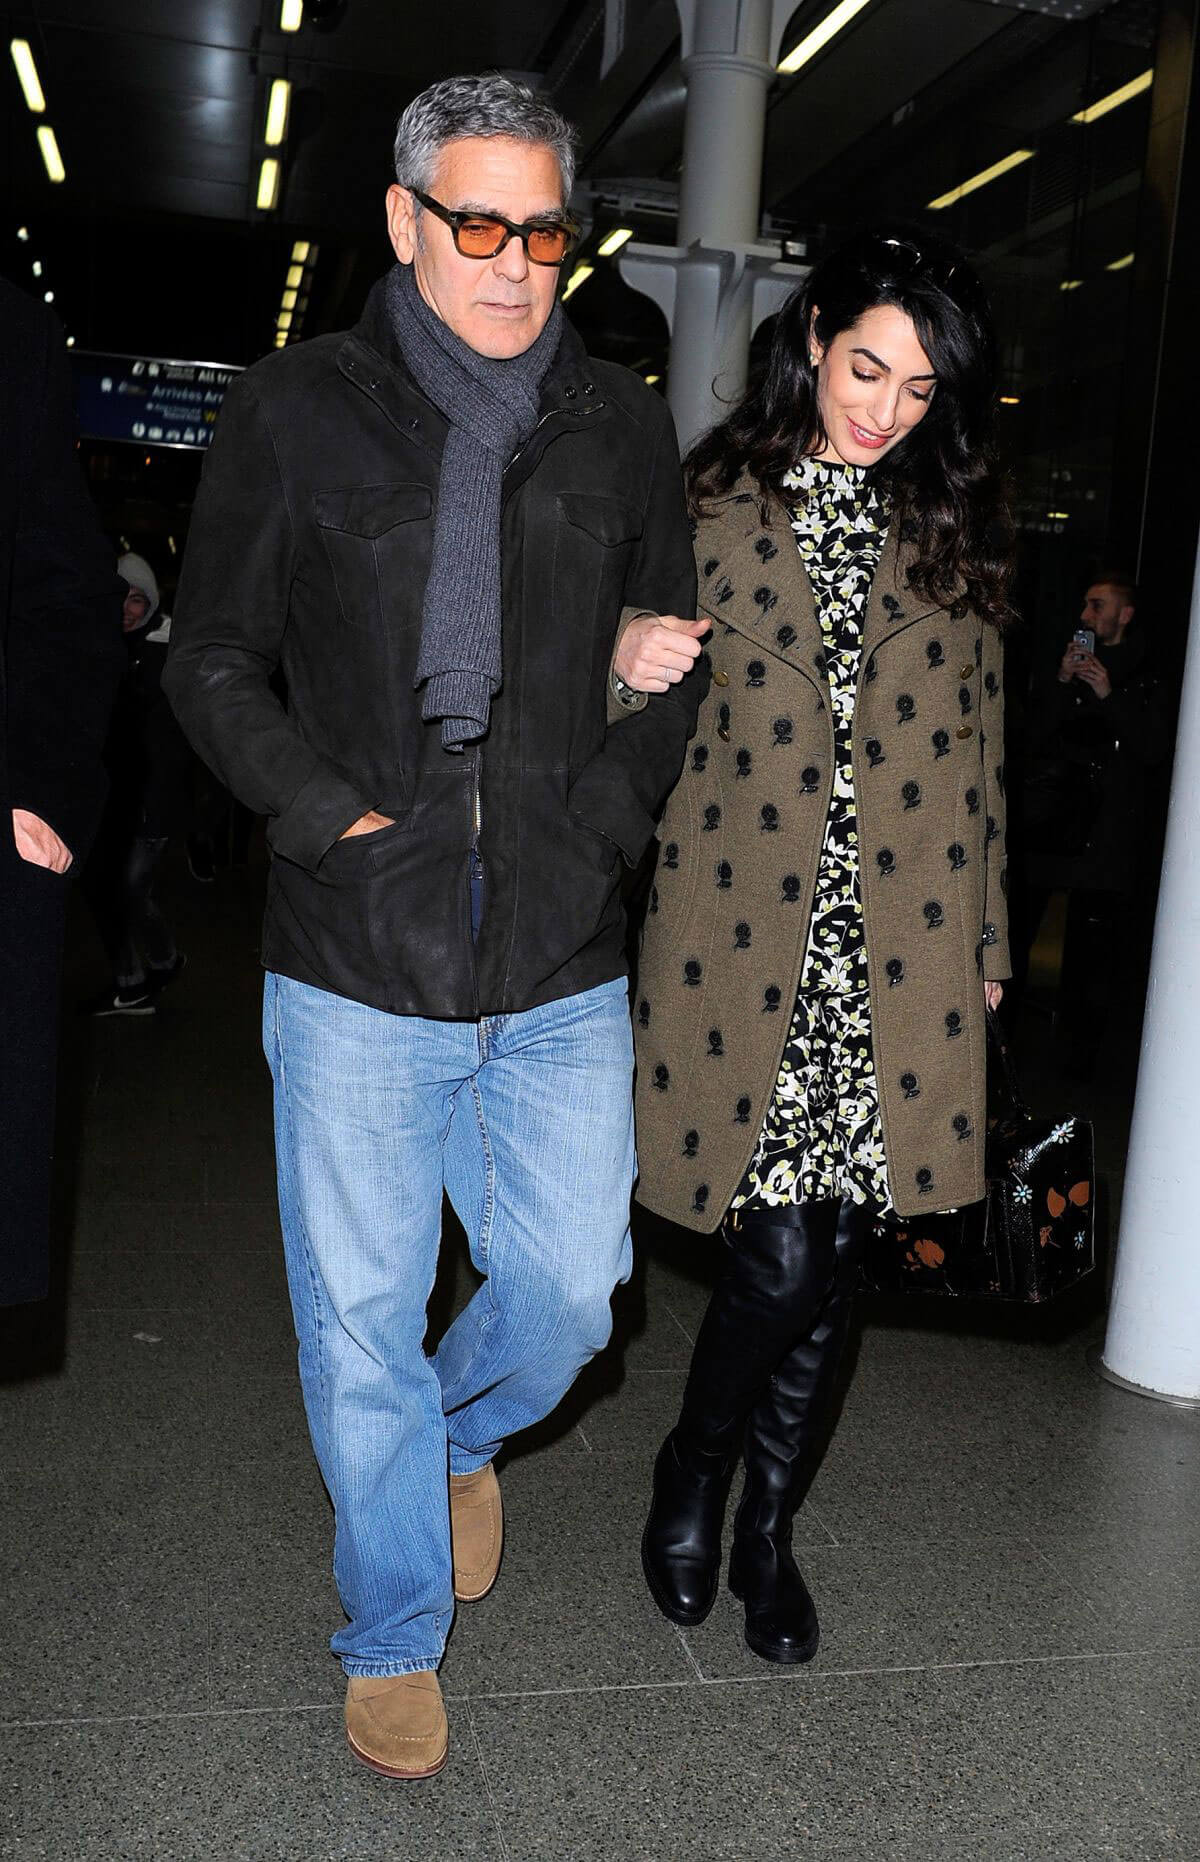 Amal Clooney and George Clooney at St Pancras Eurostar in London 12